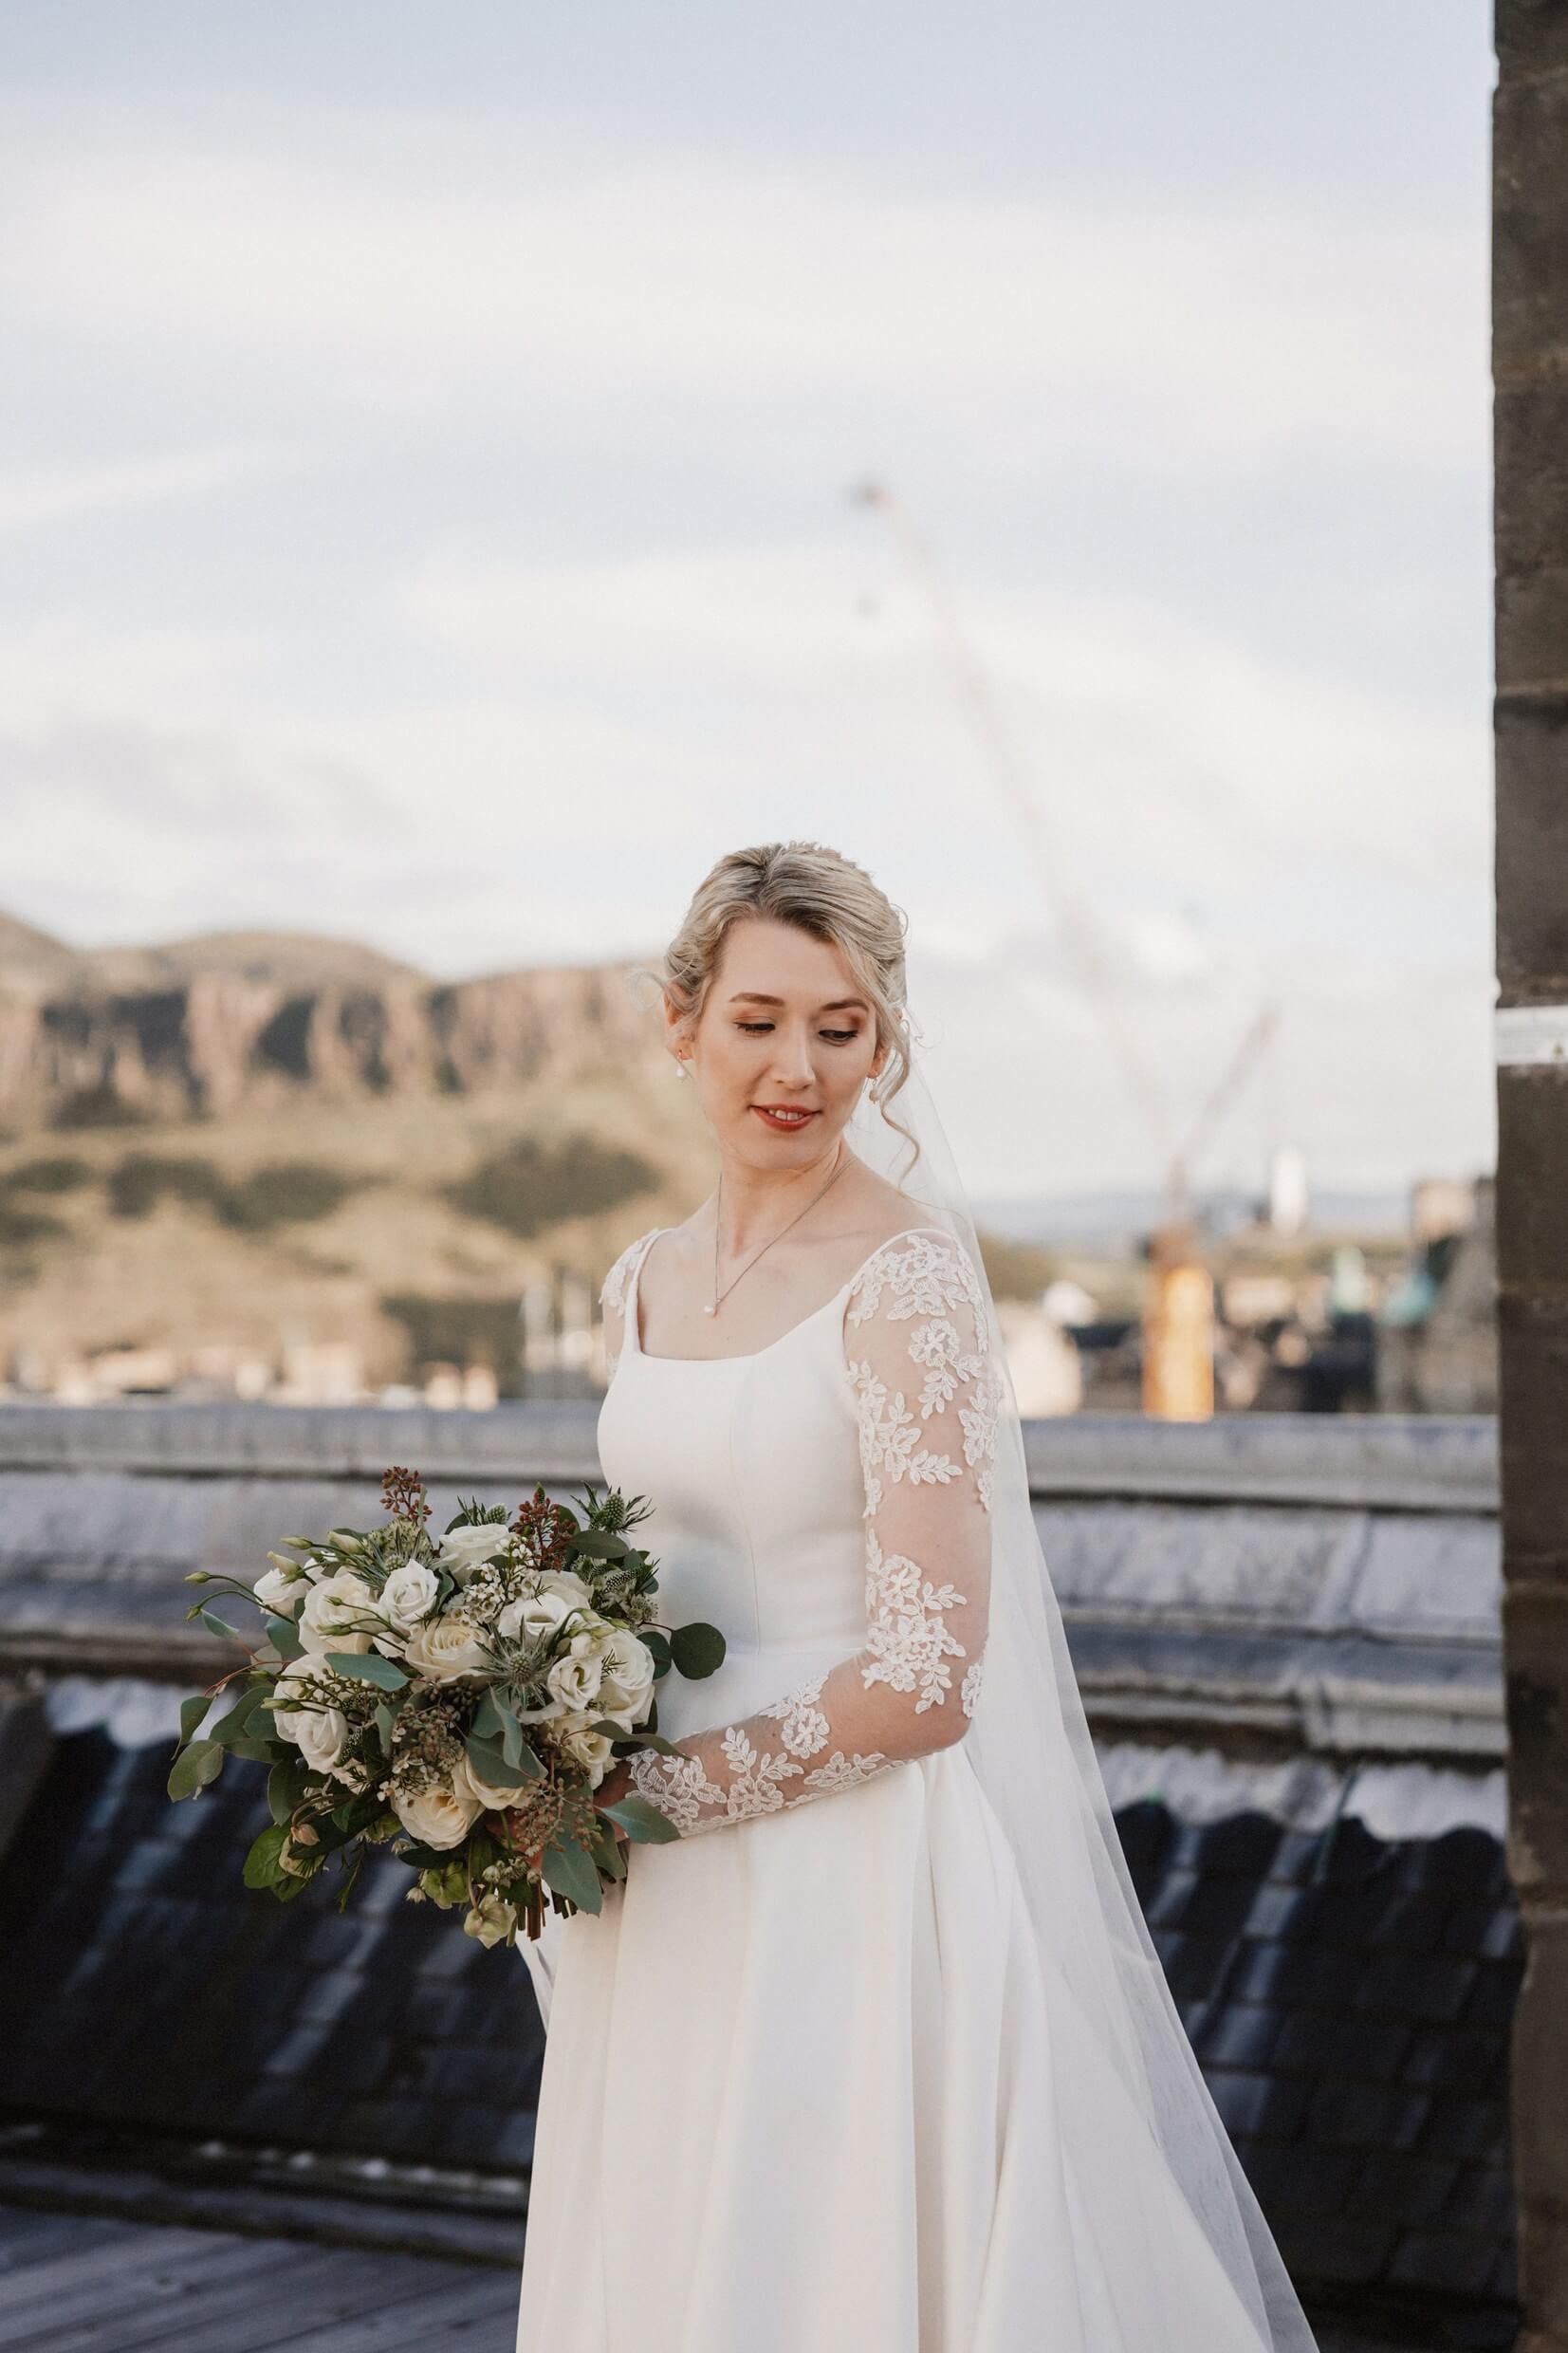 the bride poses for photos on the rooftop of the balmoral hotel edinburgh wedding venue with arthur's seat visible in the background